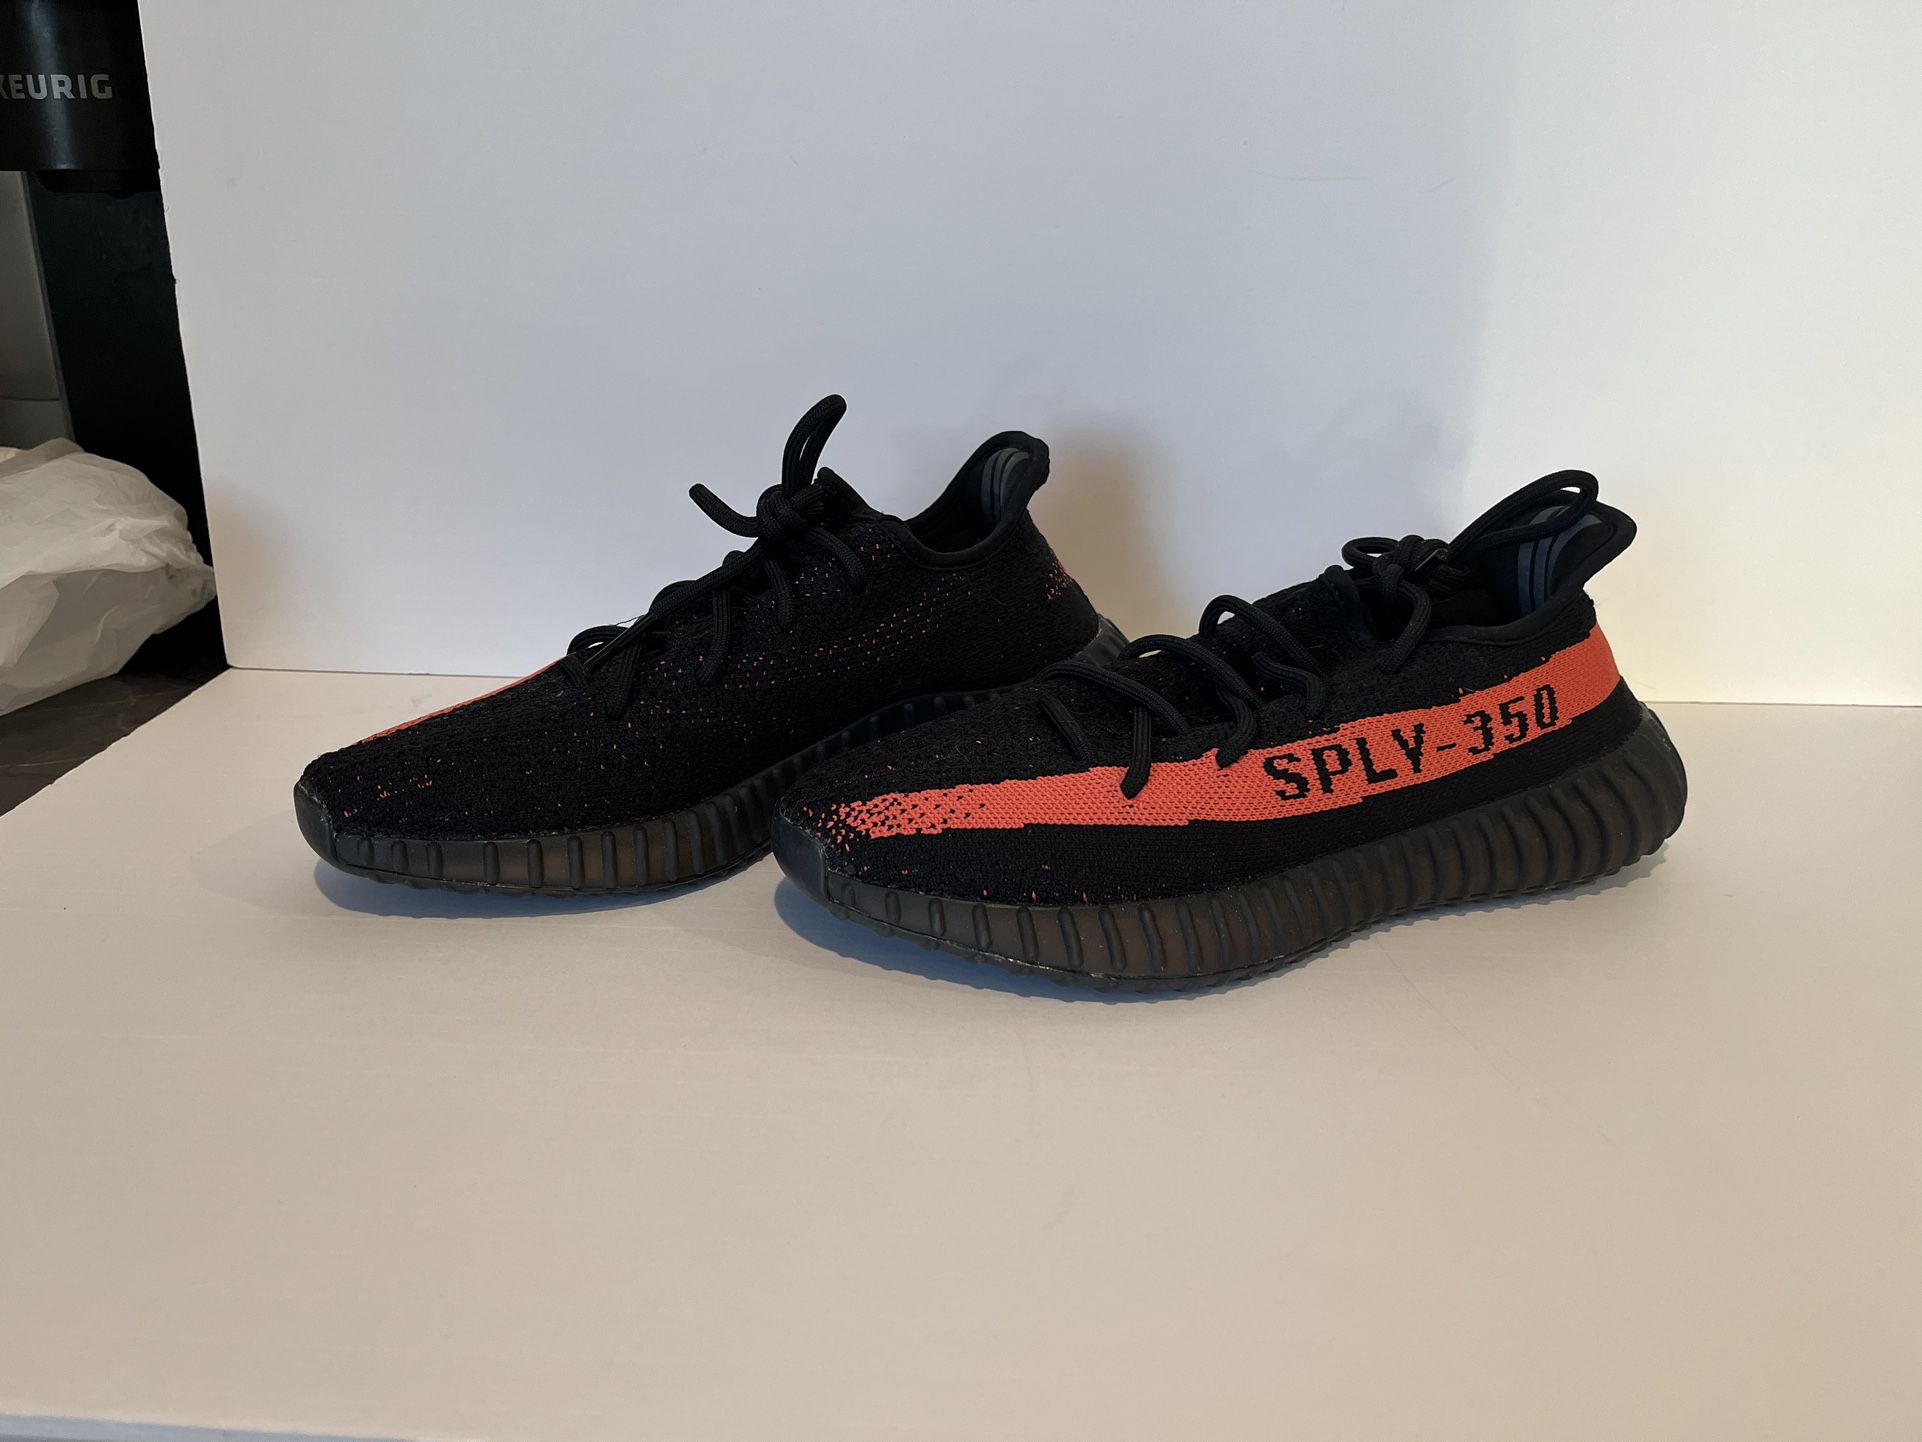 Adidas Yeezy Boost 350 V2 Sz 7.5 New for Sale in Toledo, OH - OfferUp